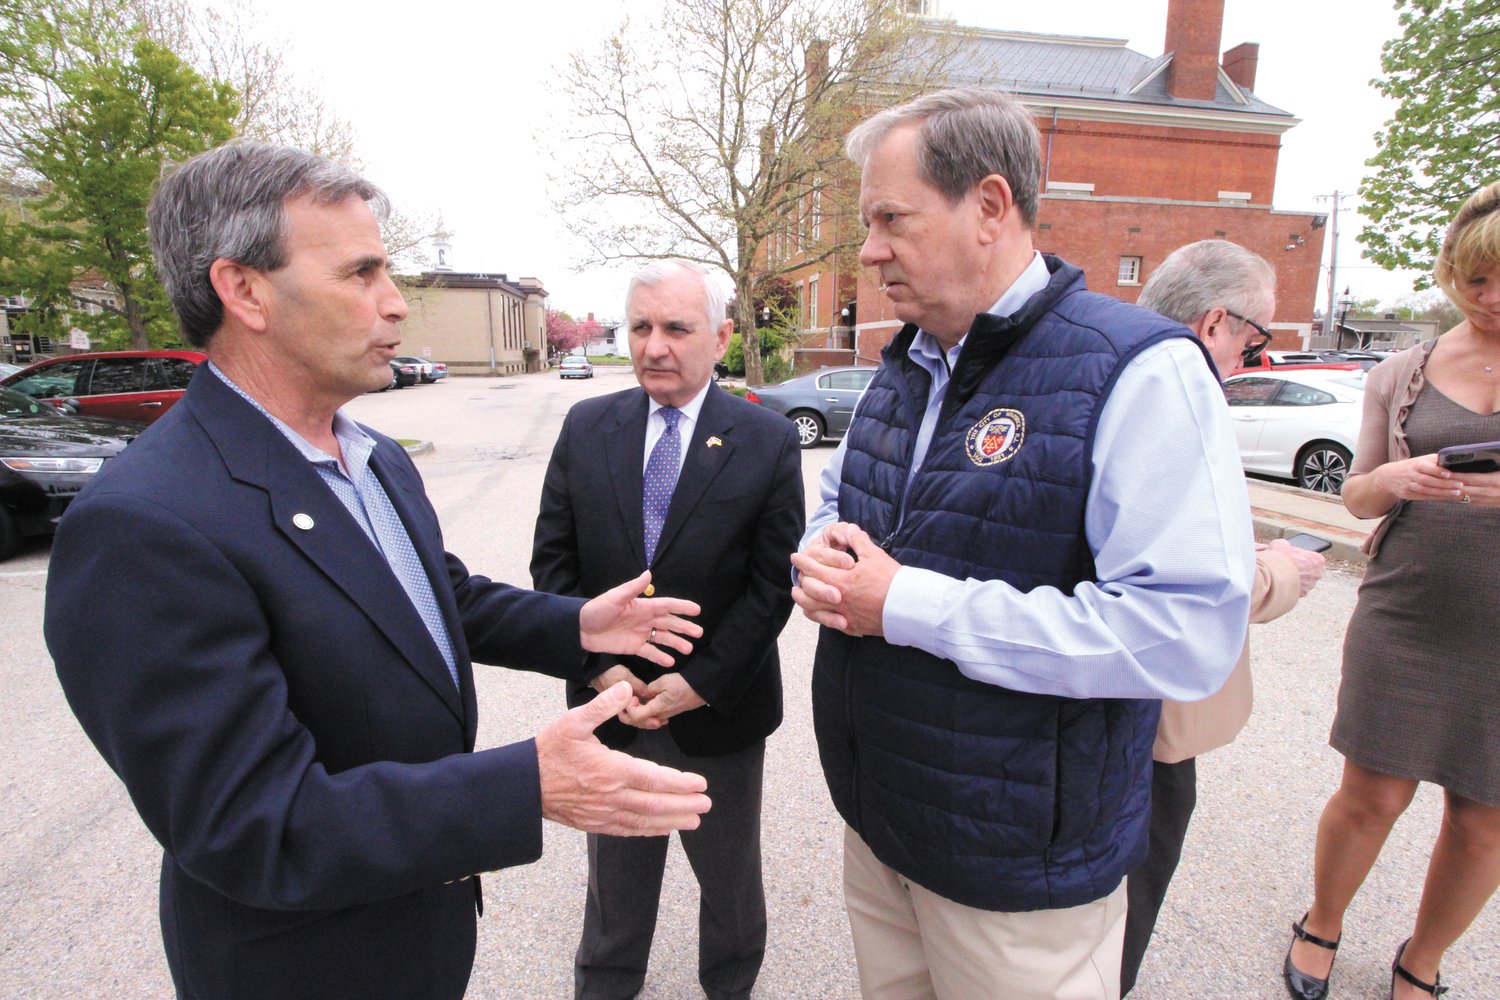 SHARING THE VISION: Mayor Frank Picozzi talks with Senator Jack Reed and Ward 1 Councilman William Foley at Friday’s announcement that the city is receiving a $5 million earmark grant for the development of Warwick Plaza including an outdoor skating rink. (Warwick Beacon photos)